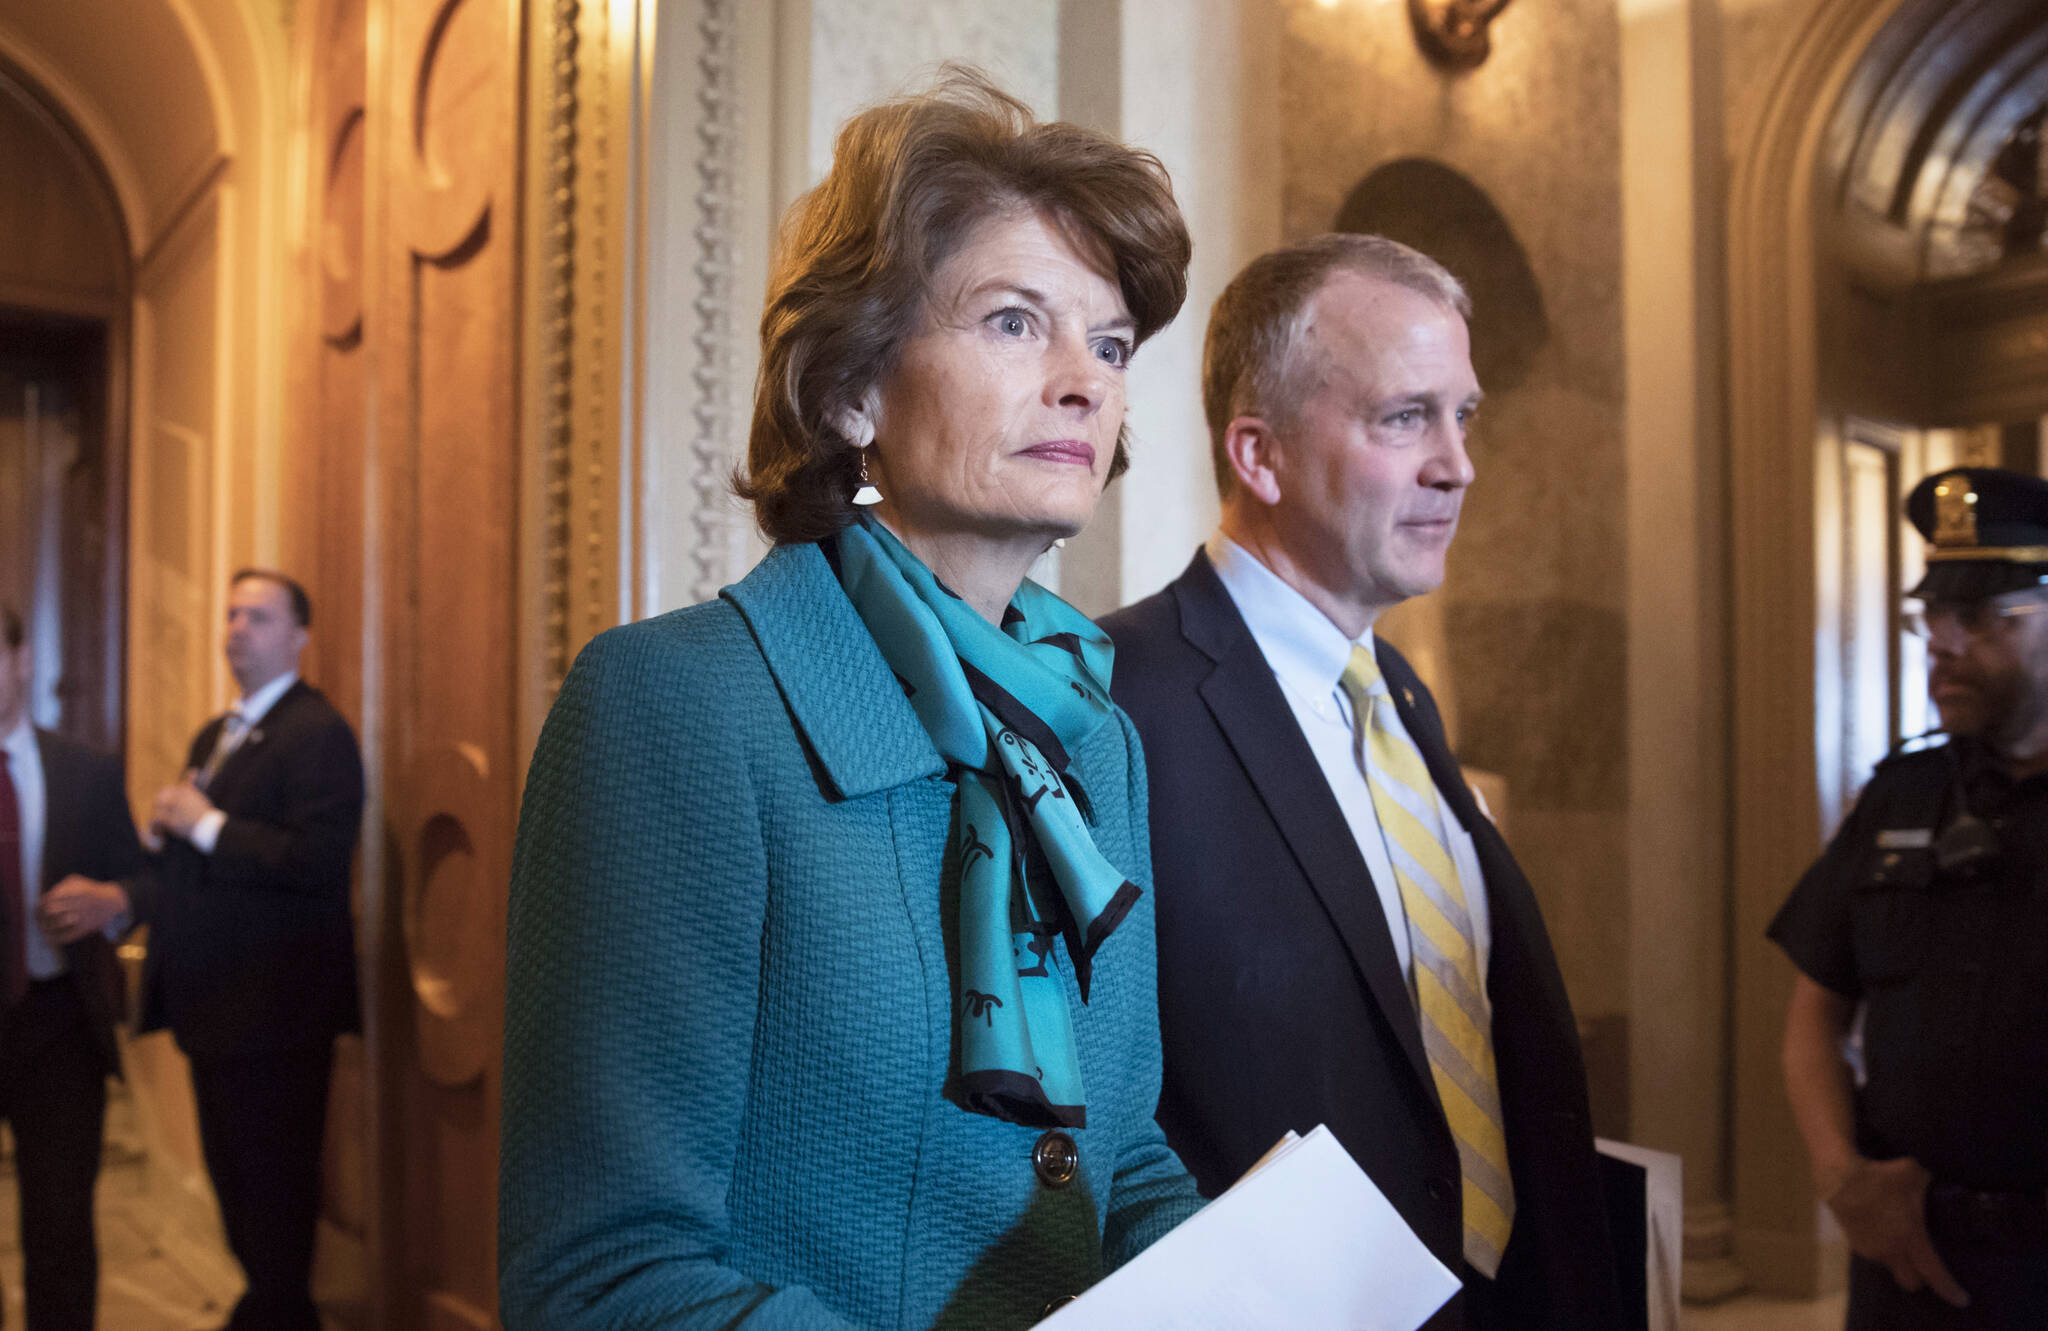 Sen. Lisa Murkowski, R-Alaska, and Sen. Dan Sullivan, R-Alaska, leave the chamber after a vote on Capitol Hill in Washington on May 10, 2017. A rural Alaska man who threatened to kill both of Alaska’s U.S. senators in a series of profanity-laden messages left at their congressional offices will be sentenced Friday, April 8, 2022. Jay Allen Johnson, who said he was too old and ill to carry out his threats, partially blamed his behavior on the mixture of pain medications and alcohol and the isolation that was prevalent during the five-month span of 2021 when he left the threatening voicemails. (AP Photo/J. Scott Applewhite, File)